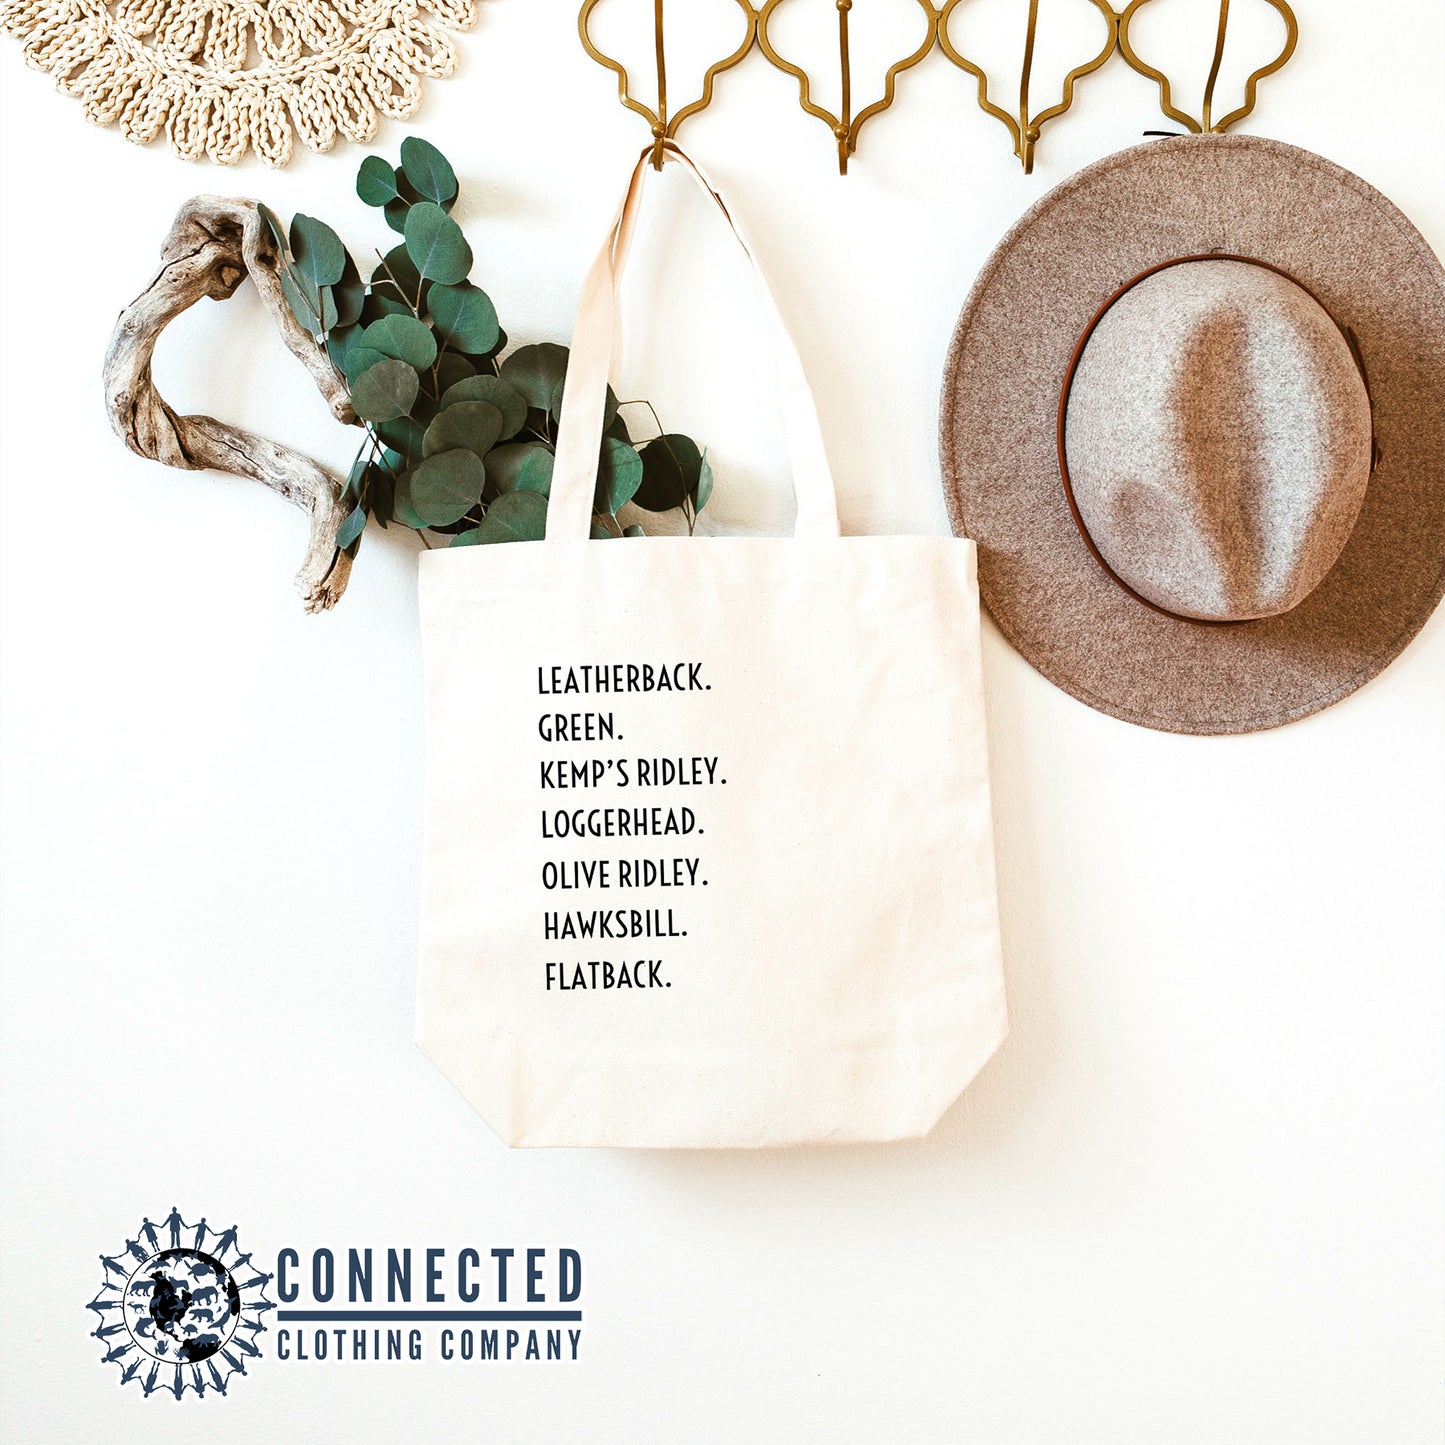 7 Sea Turtle Species Tote Bag - Connected Clothing Company - 10% of proceeds donated to Ocean Conservation